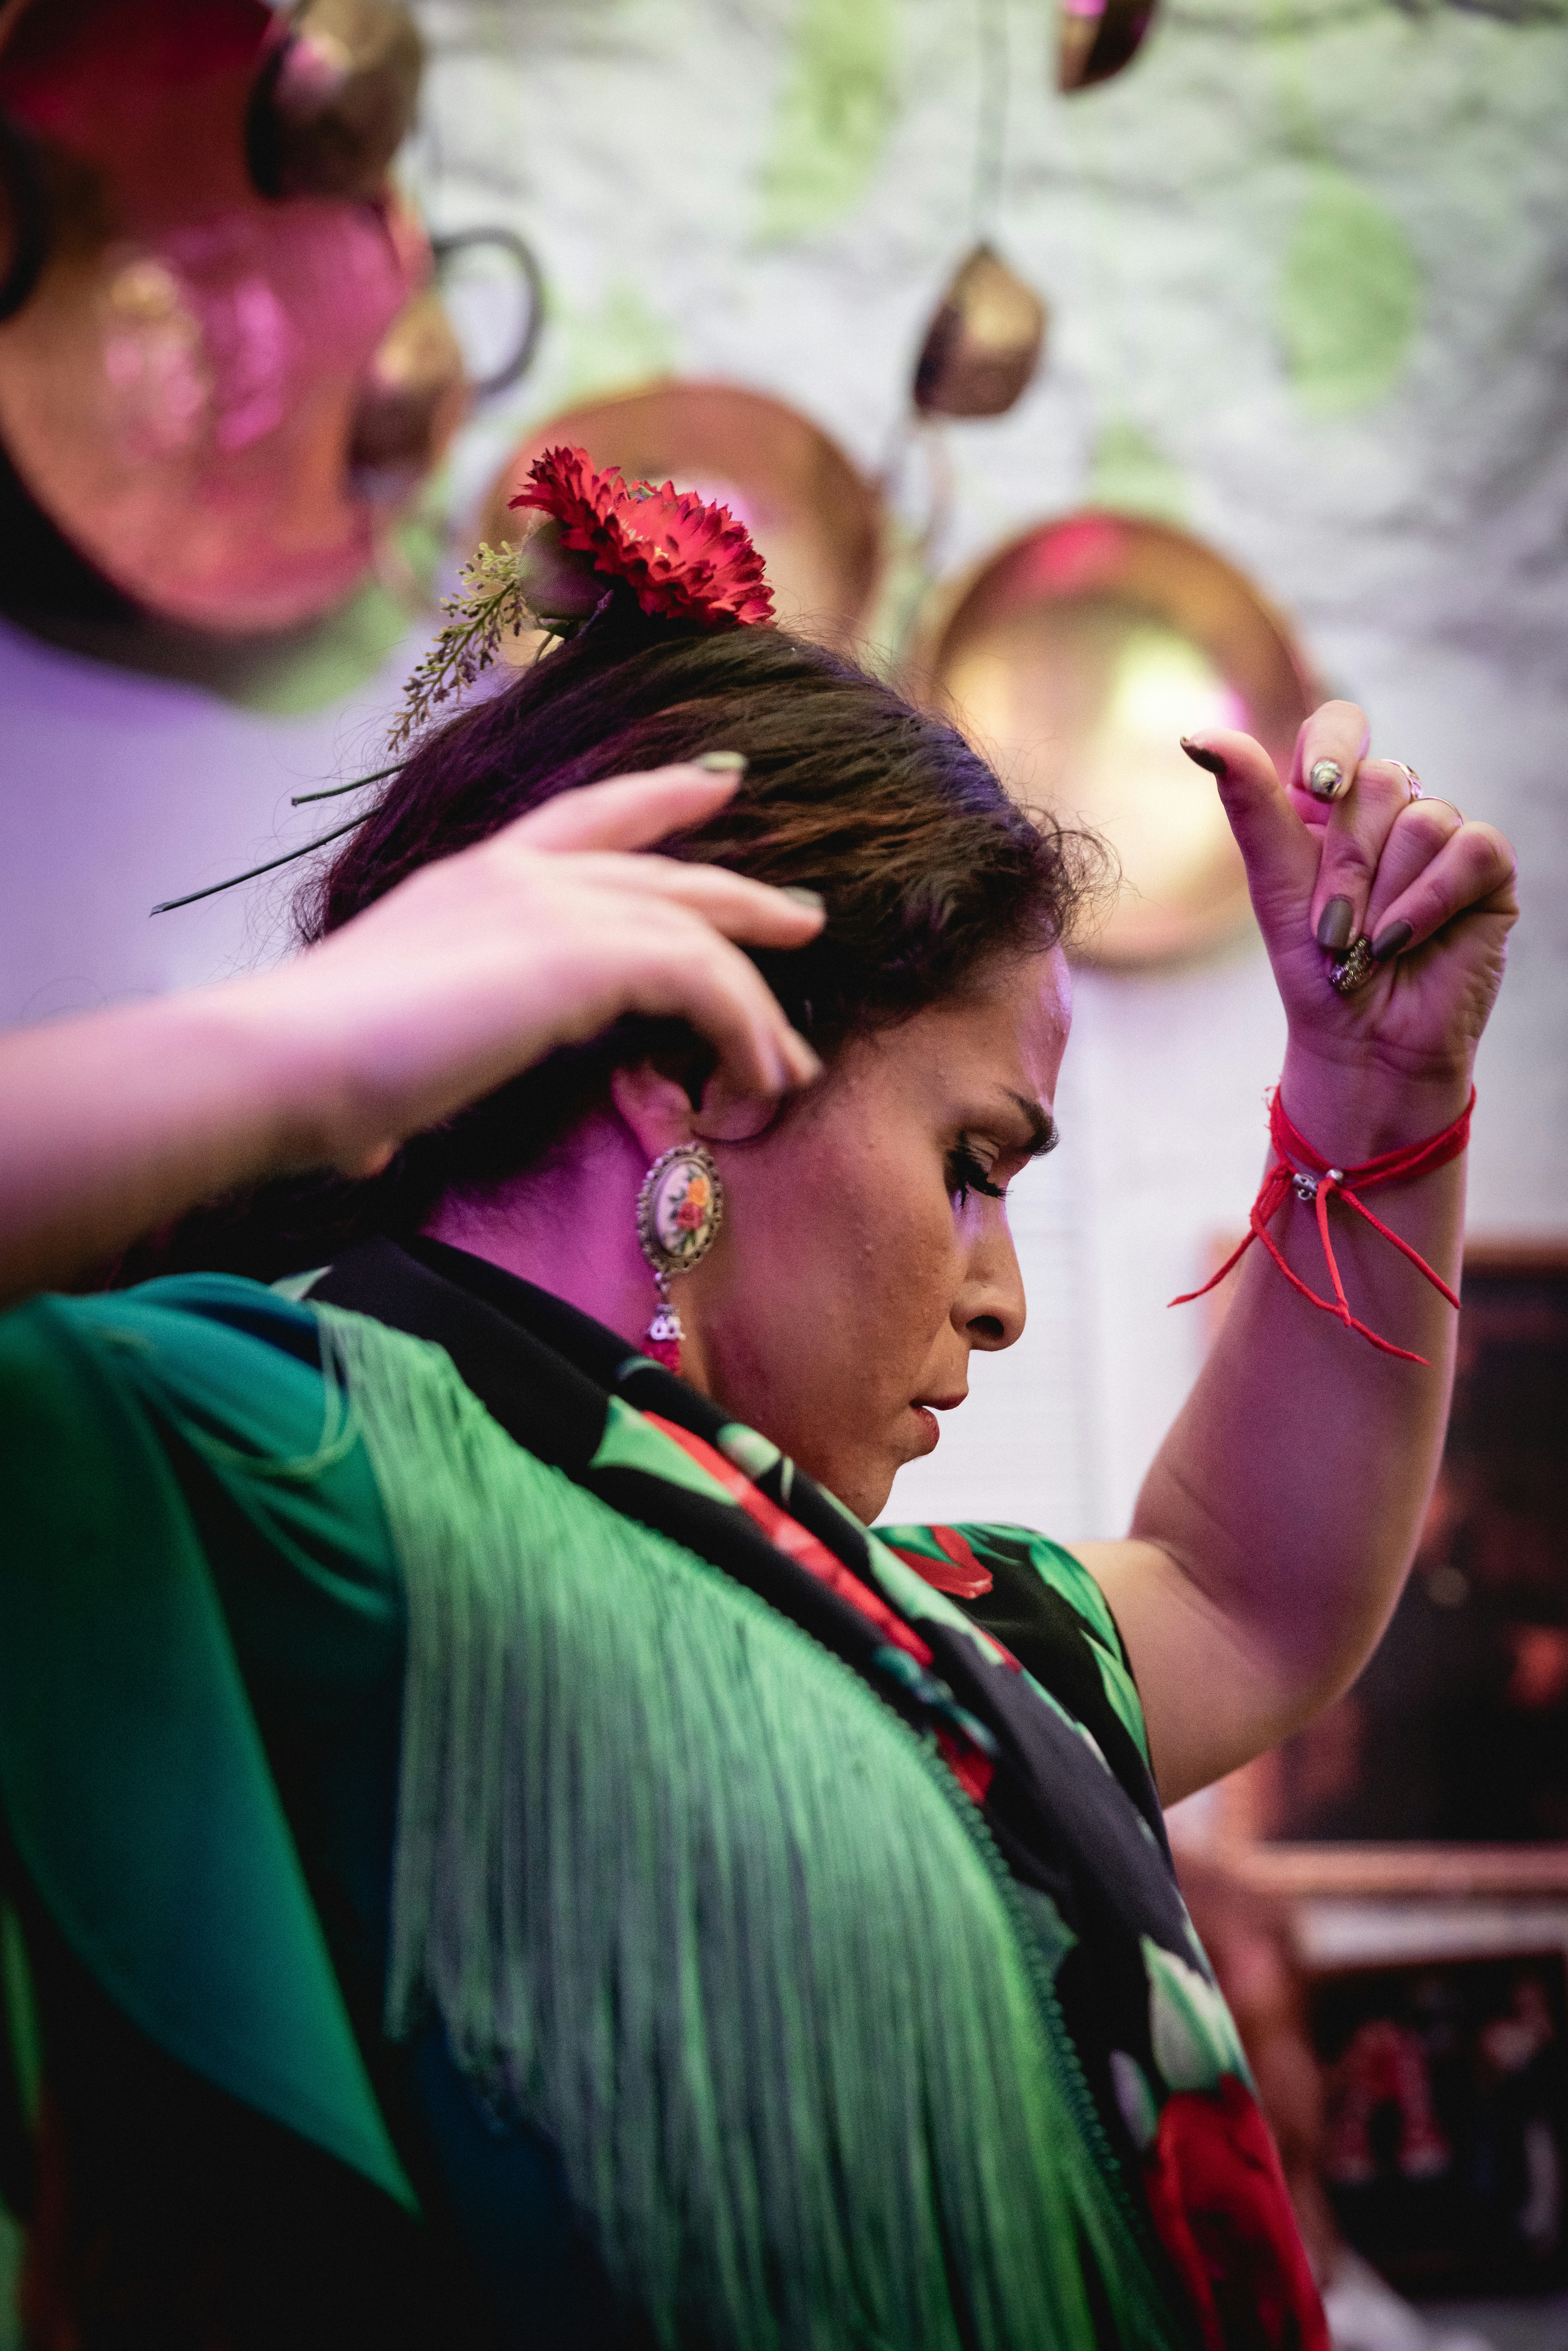 A close-up photo of a woman dancing Flamenco. She is wearing a jade green top; her arms are held aloft and she is looking downwards. 